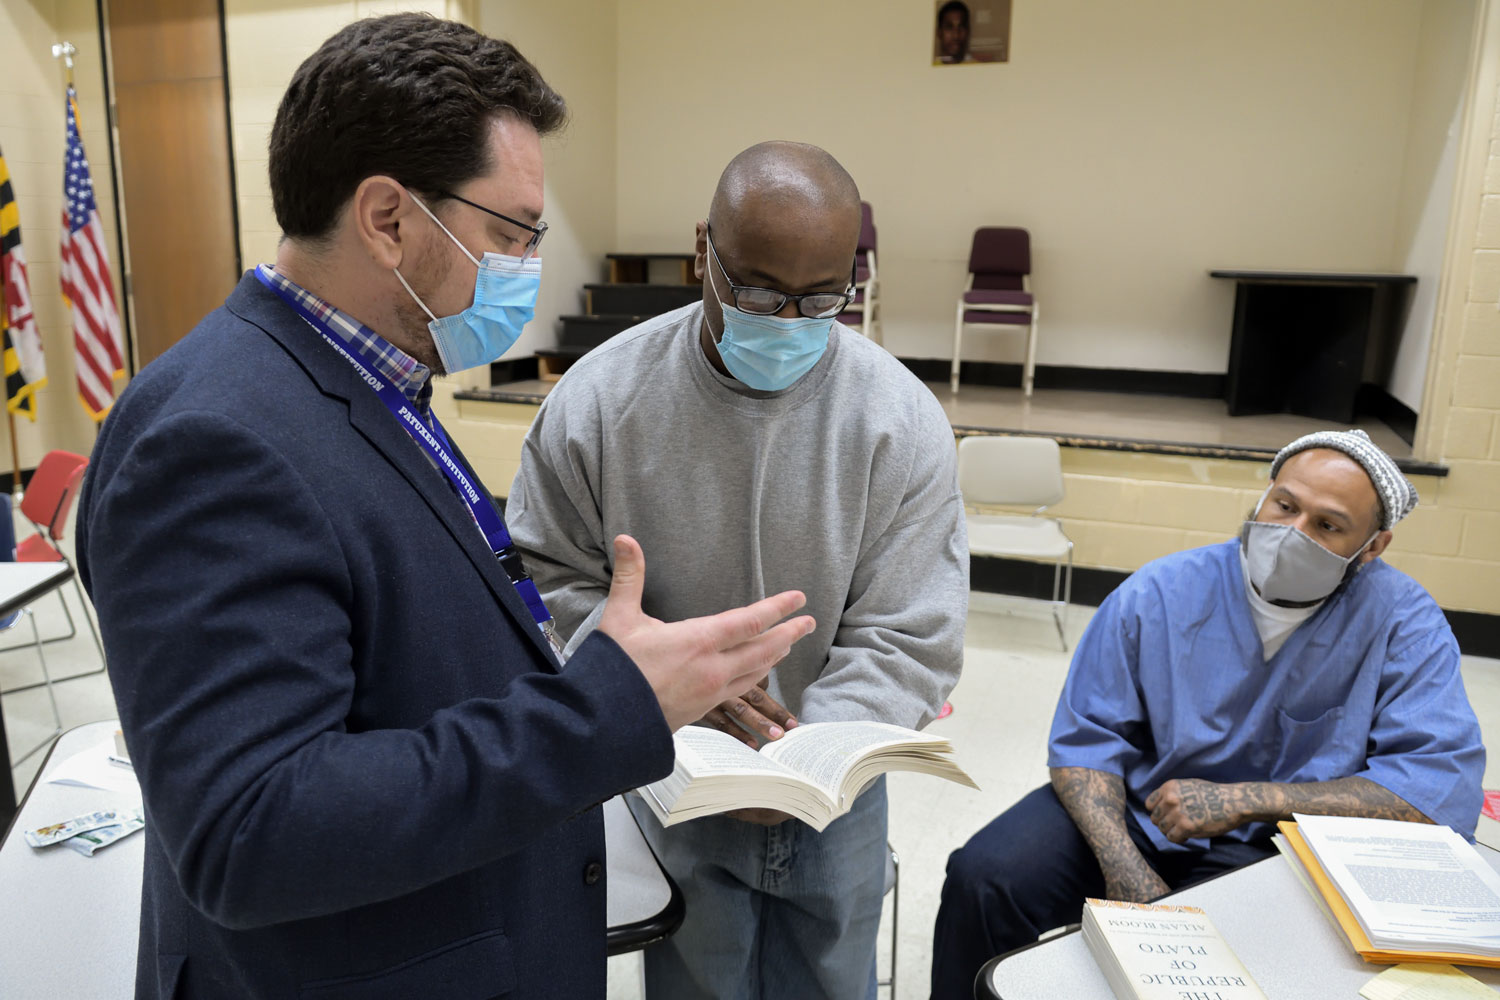 Man wearing a mask holds a book and discusses with two other men wearing masks in a prison